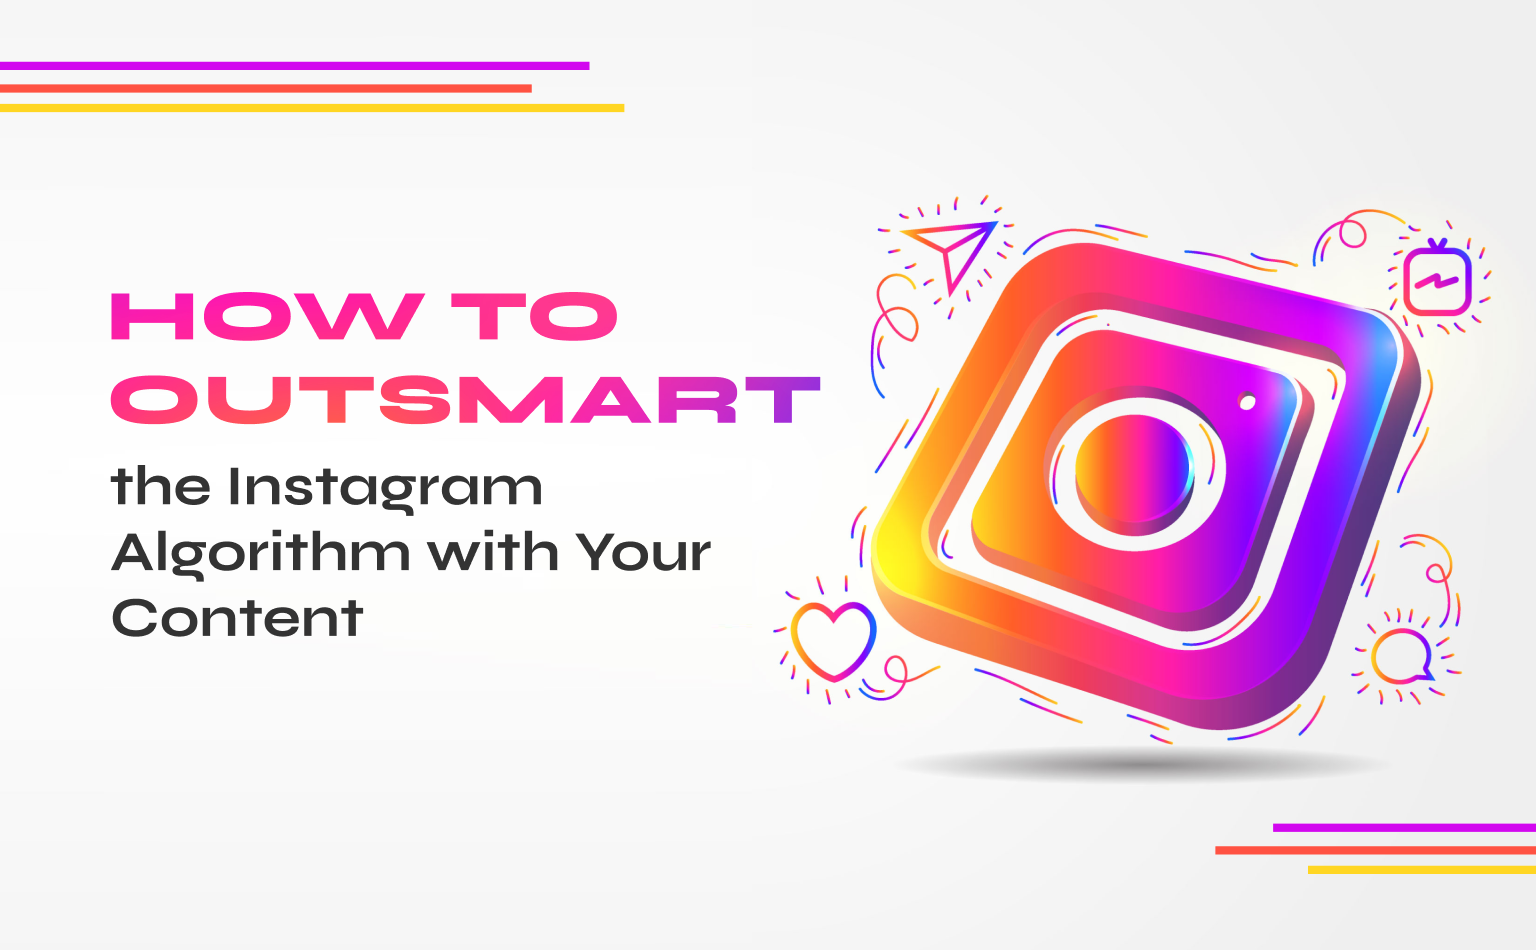 How to Outsmart the Instagram Algorithm with Your Content-Unlimitink